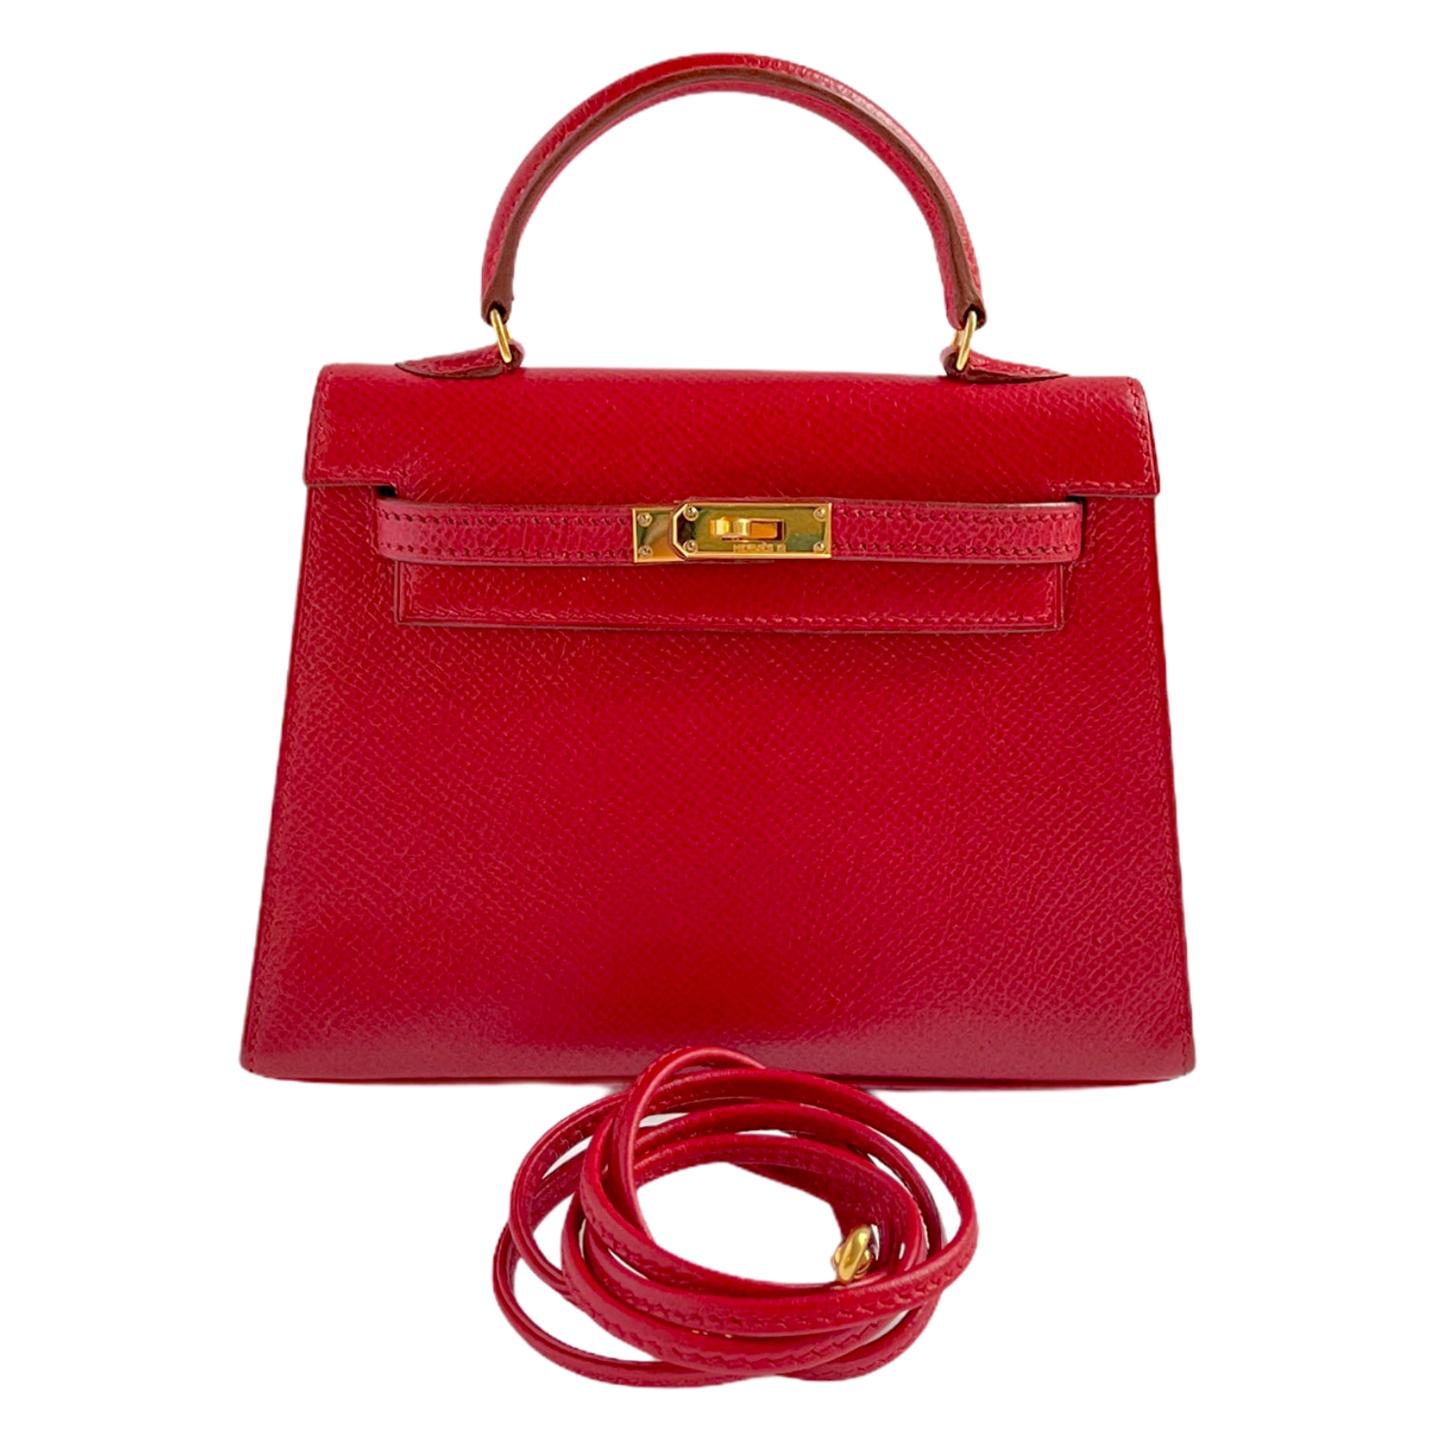 1stdibs Exclusives Hermès Micro Kelly 15cm Rouge Courchevel Gold Hardware